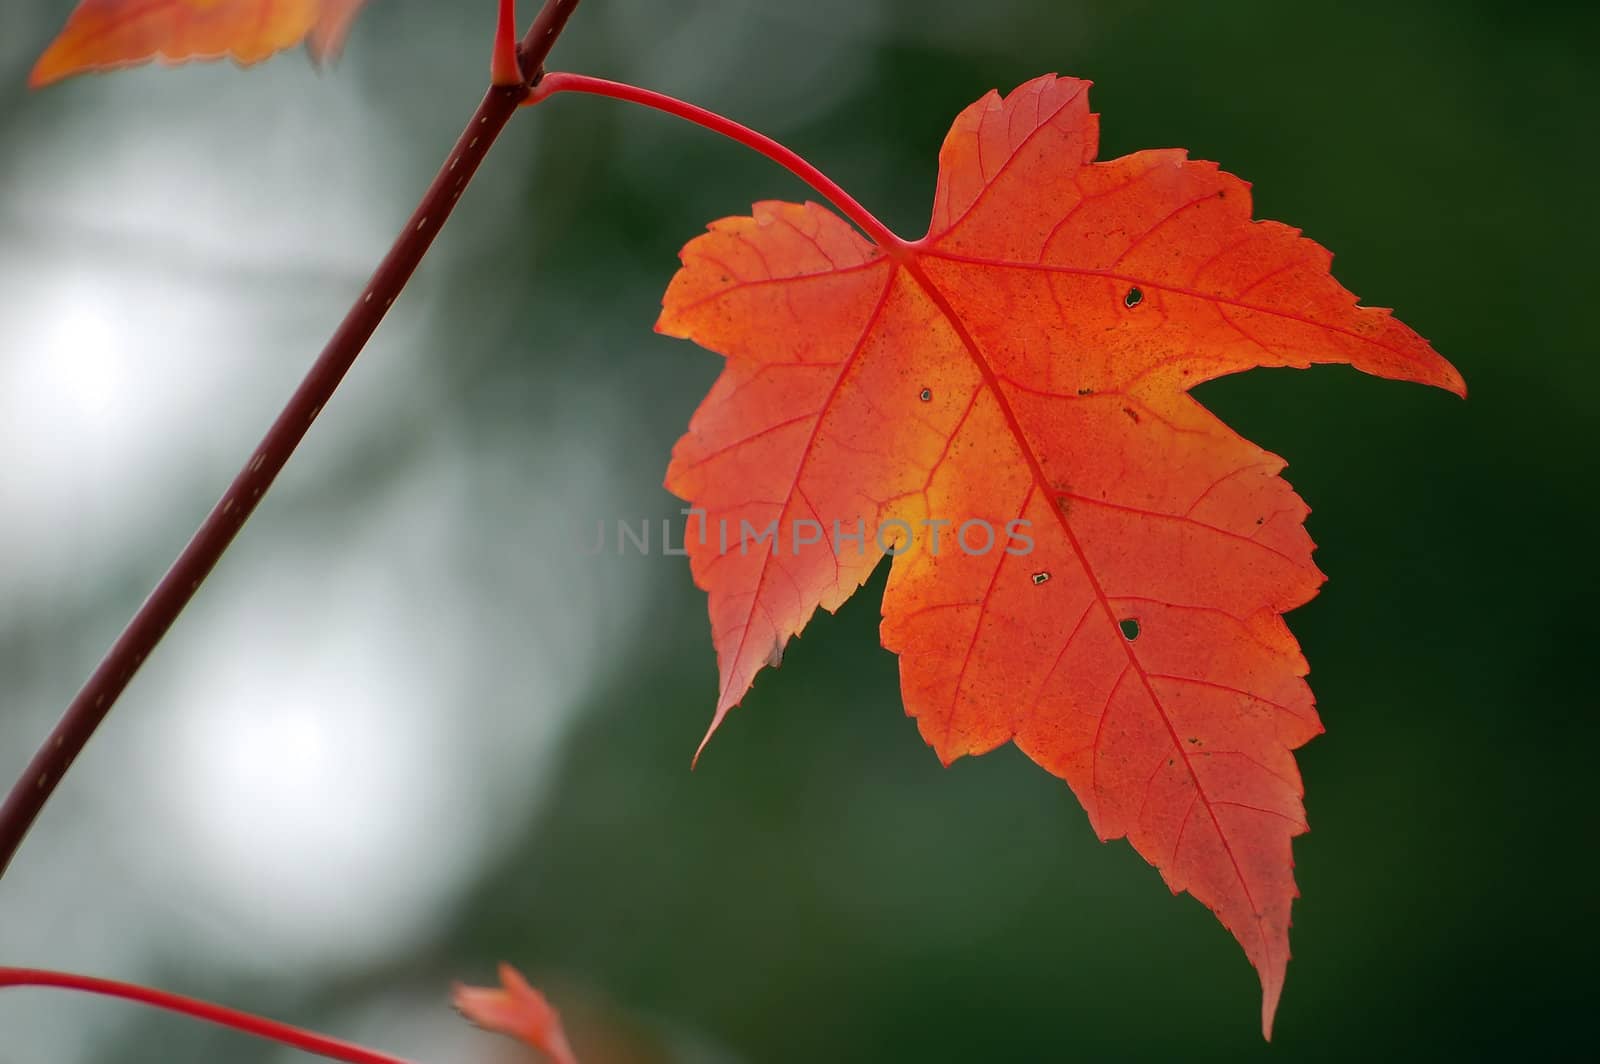 Close-up picture of a red maple leaf with a green background